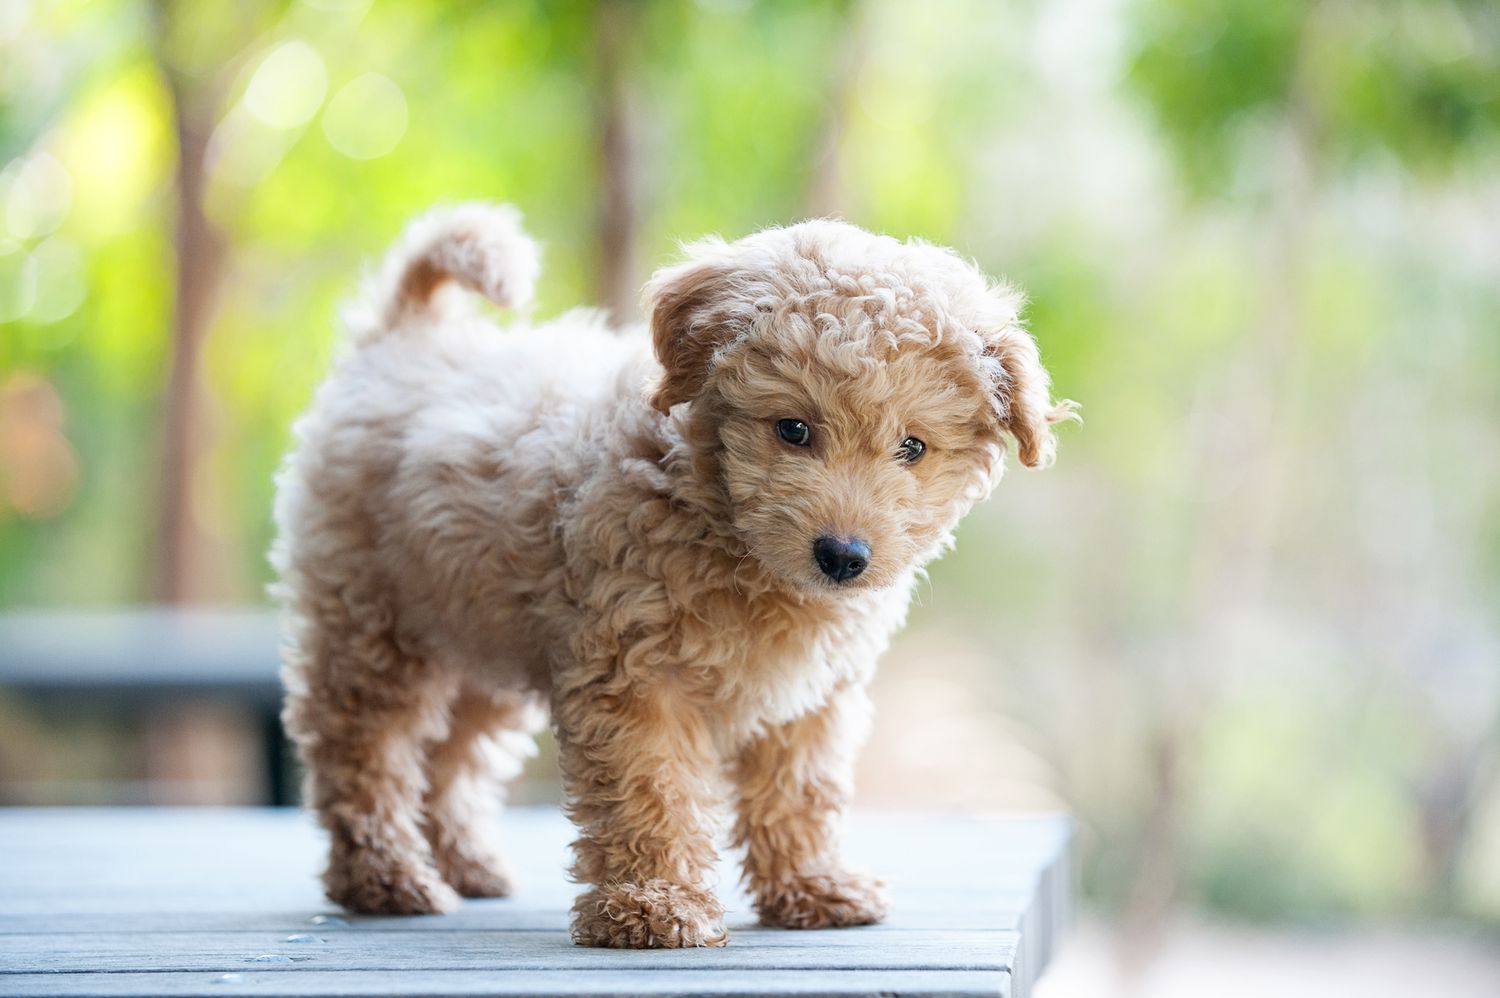 Dog Breeds That Look Like Puppies at Any Age | Martha Stewart